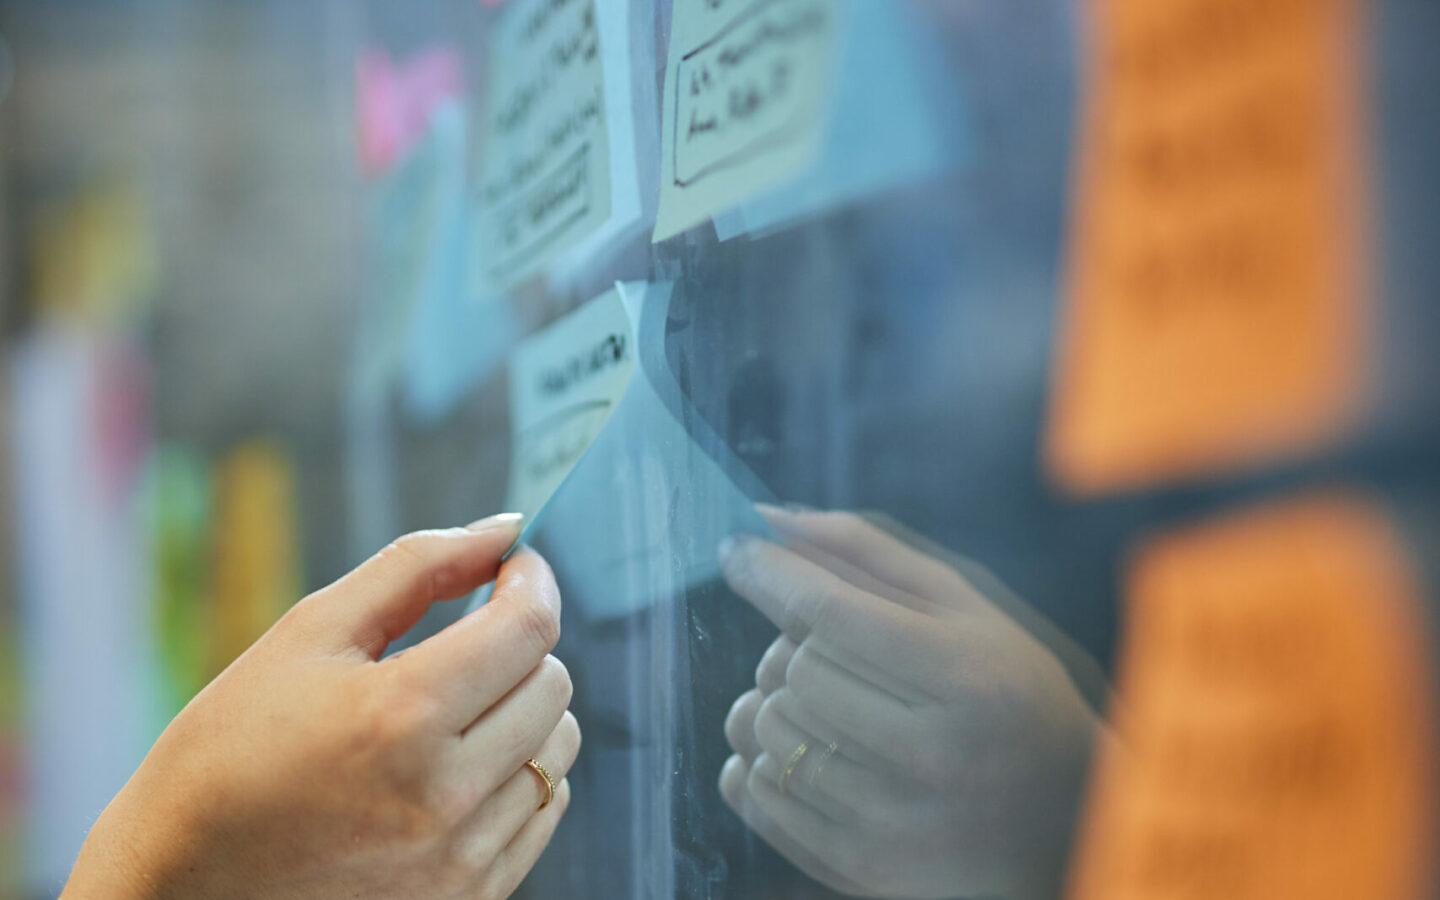 Image detail of a woman's hand taking a Post-It from a glass wall.